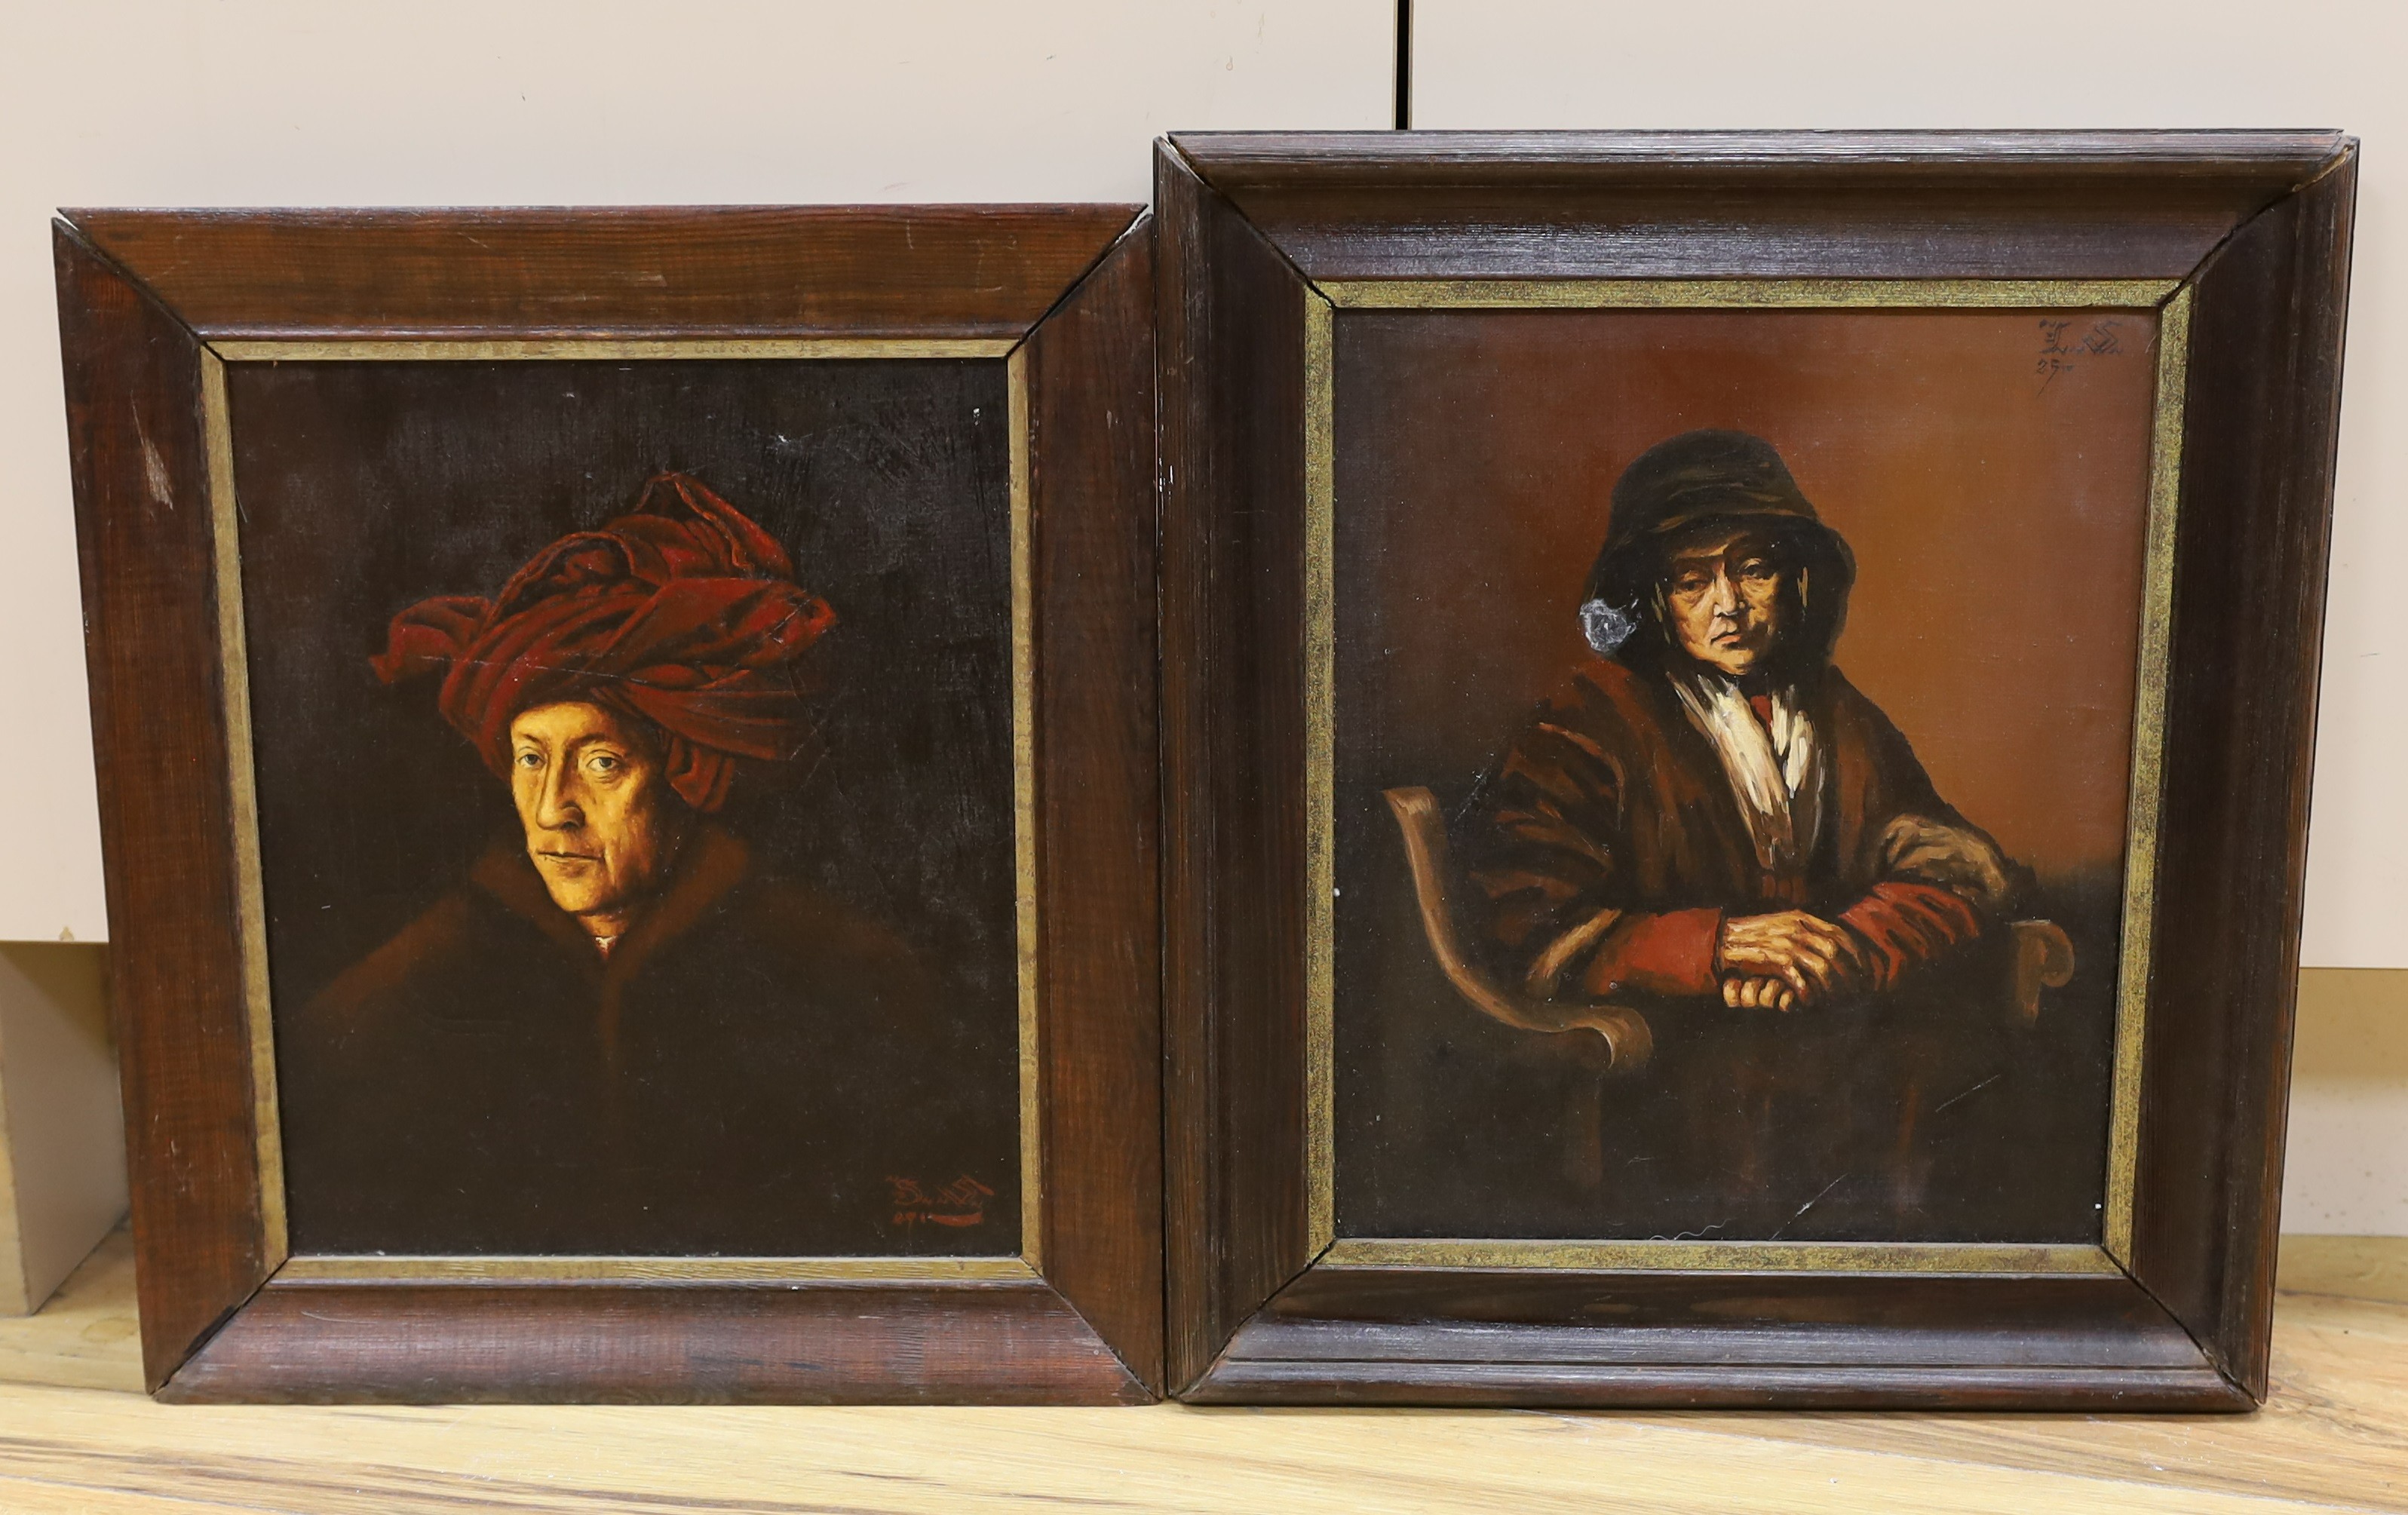 Continental School c1910, pair of oils on canvas, Portrait of a turbanned man and of a seated woman, after Rembrandt, signed and dated, 33 x 27cm